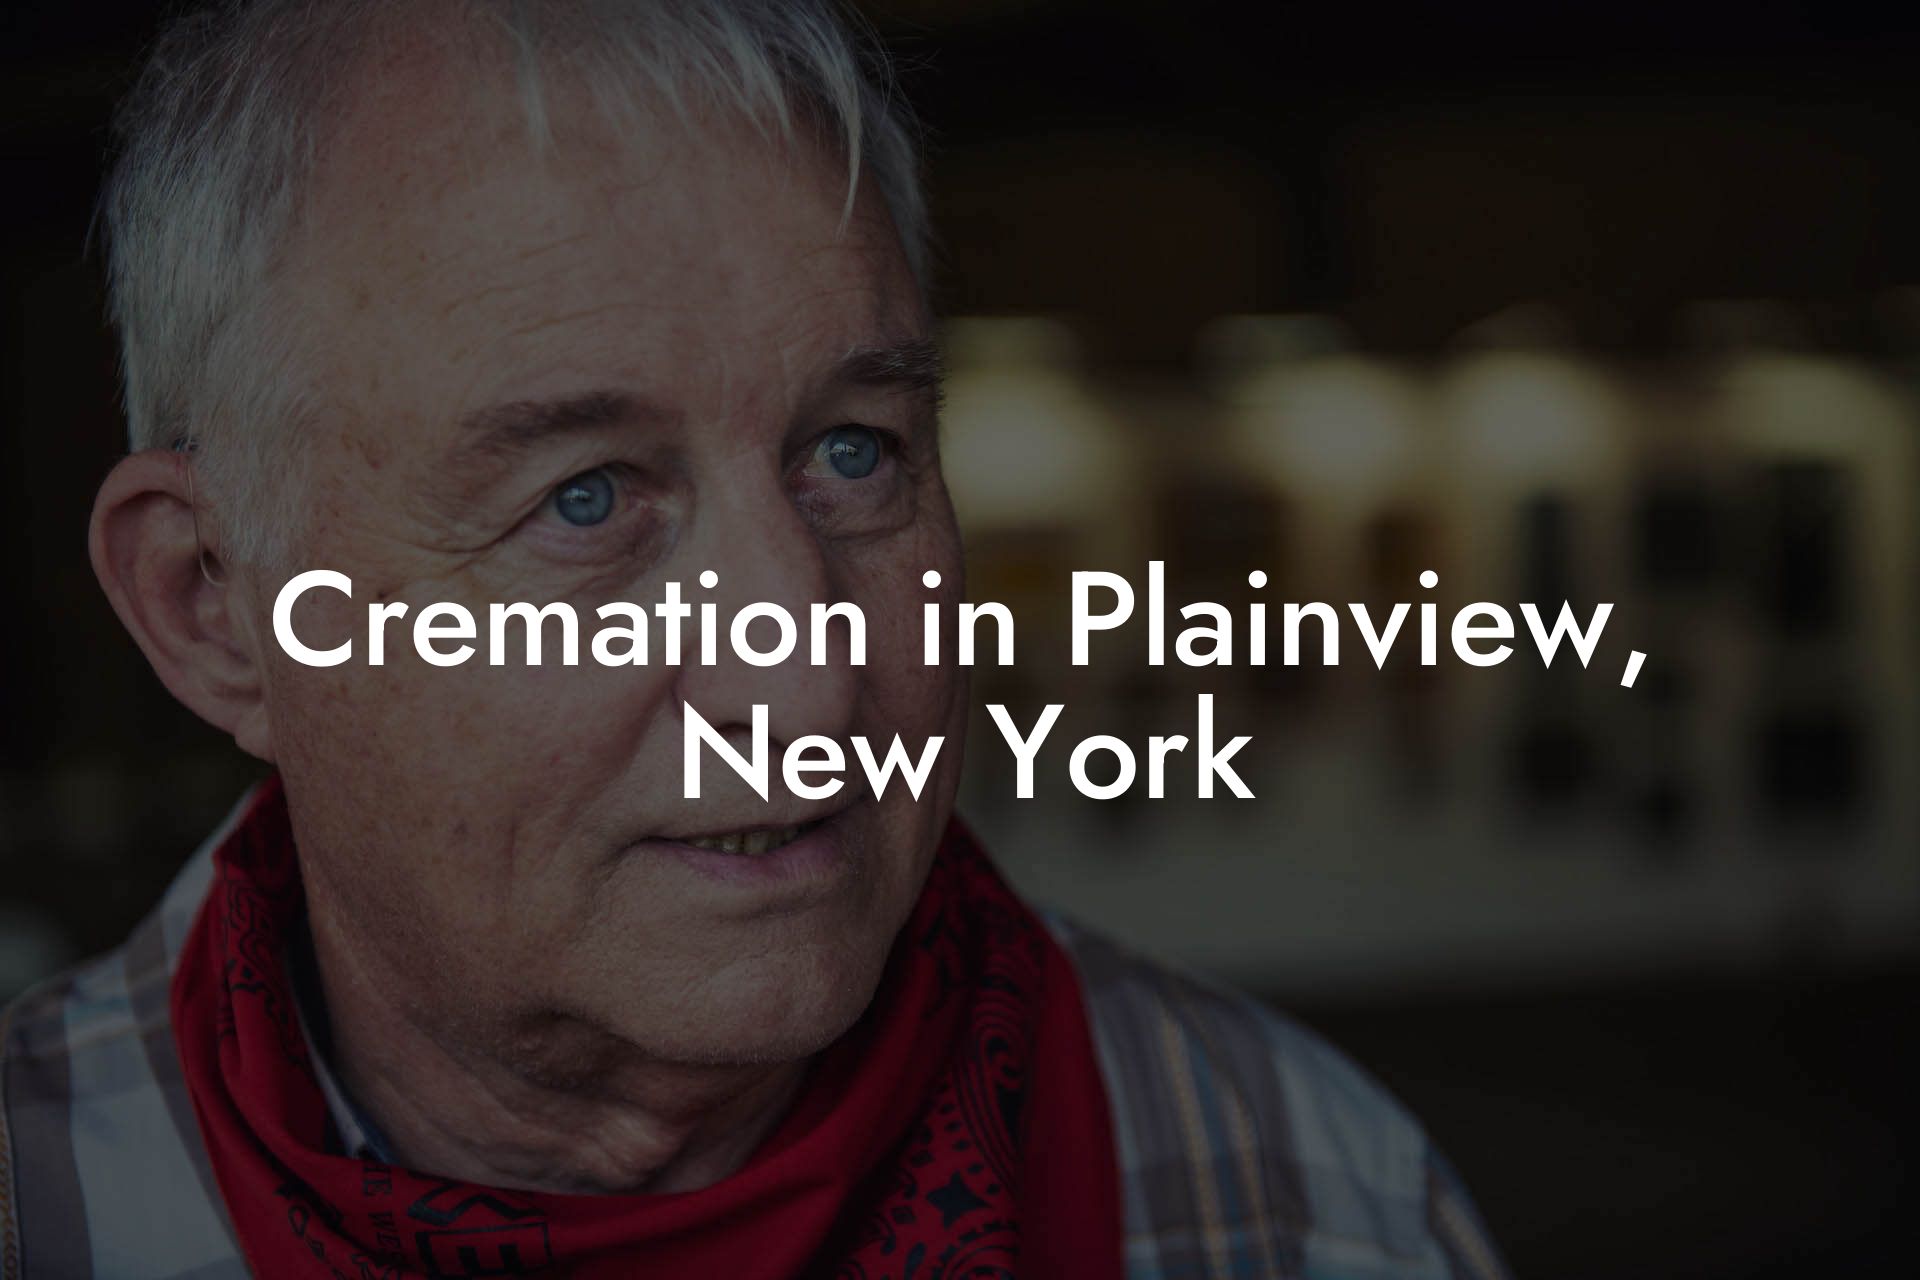 Cremation in Plainview, New York